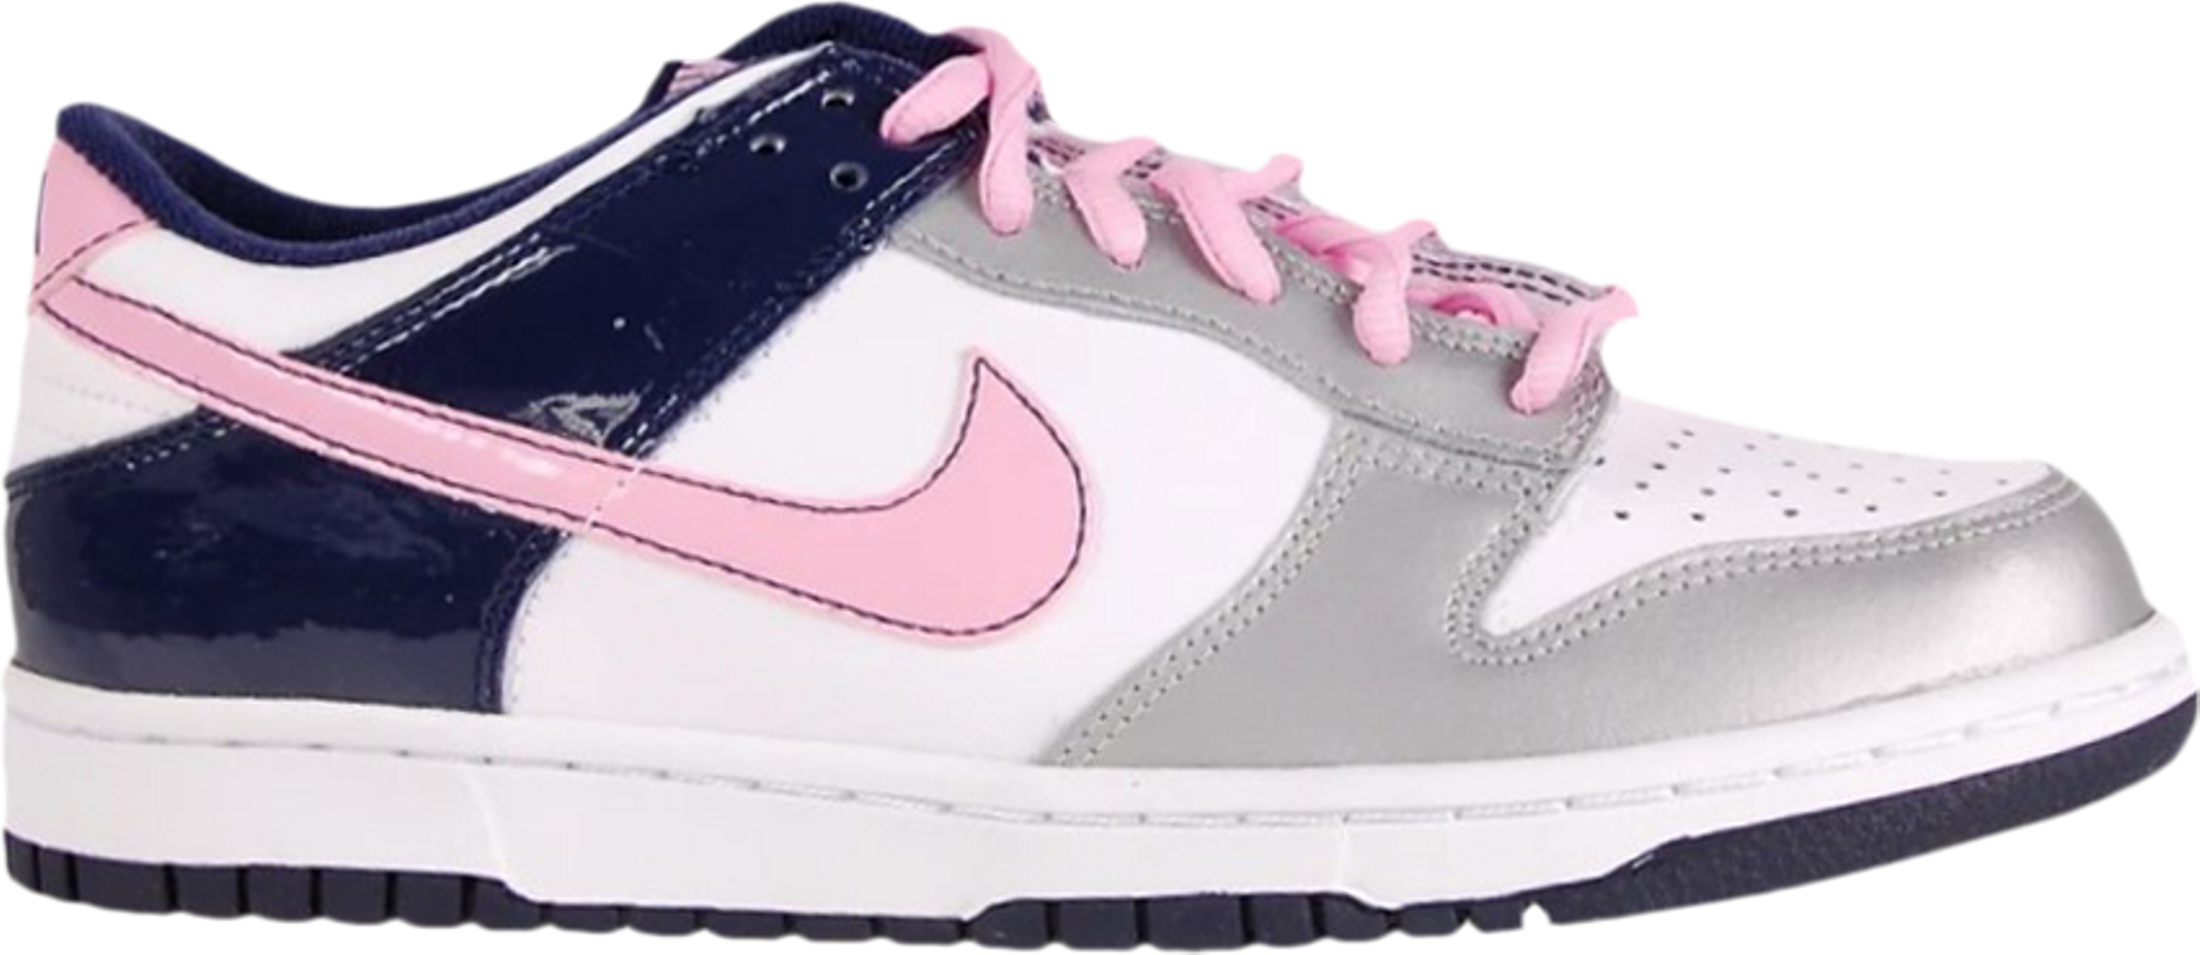 Buy Dunk Low GS 'White Perfect Pink' - 309601 166 | GOAT